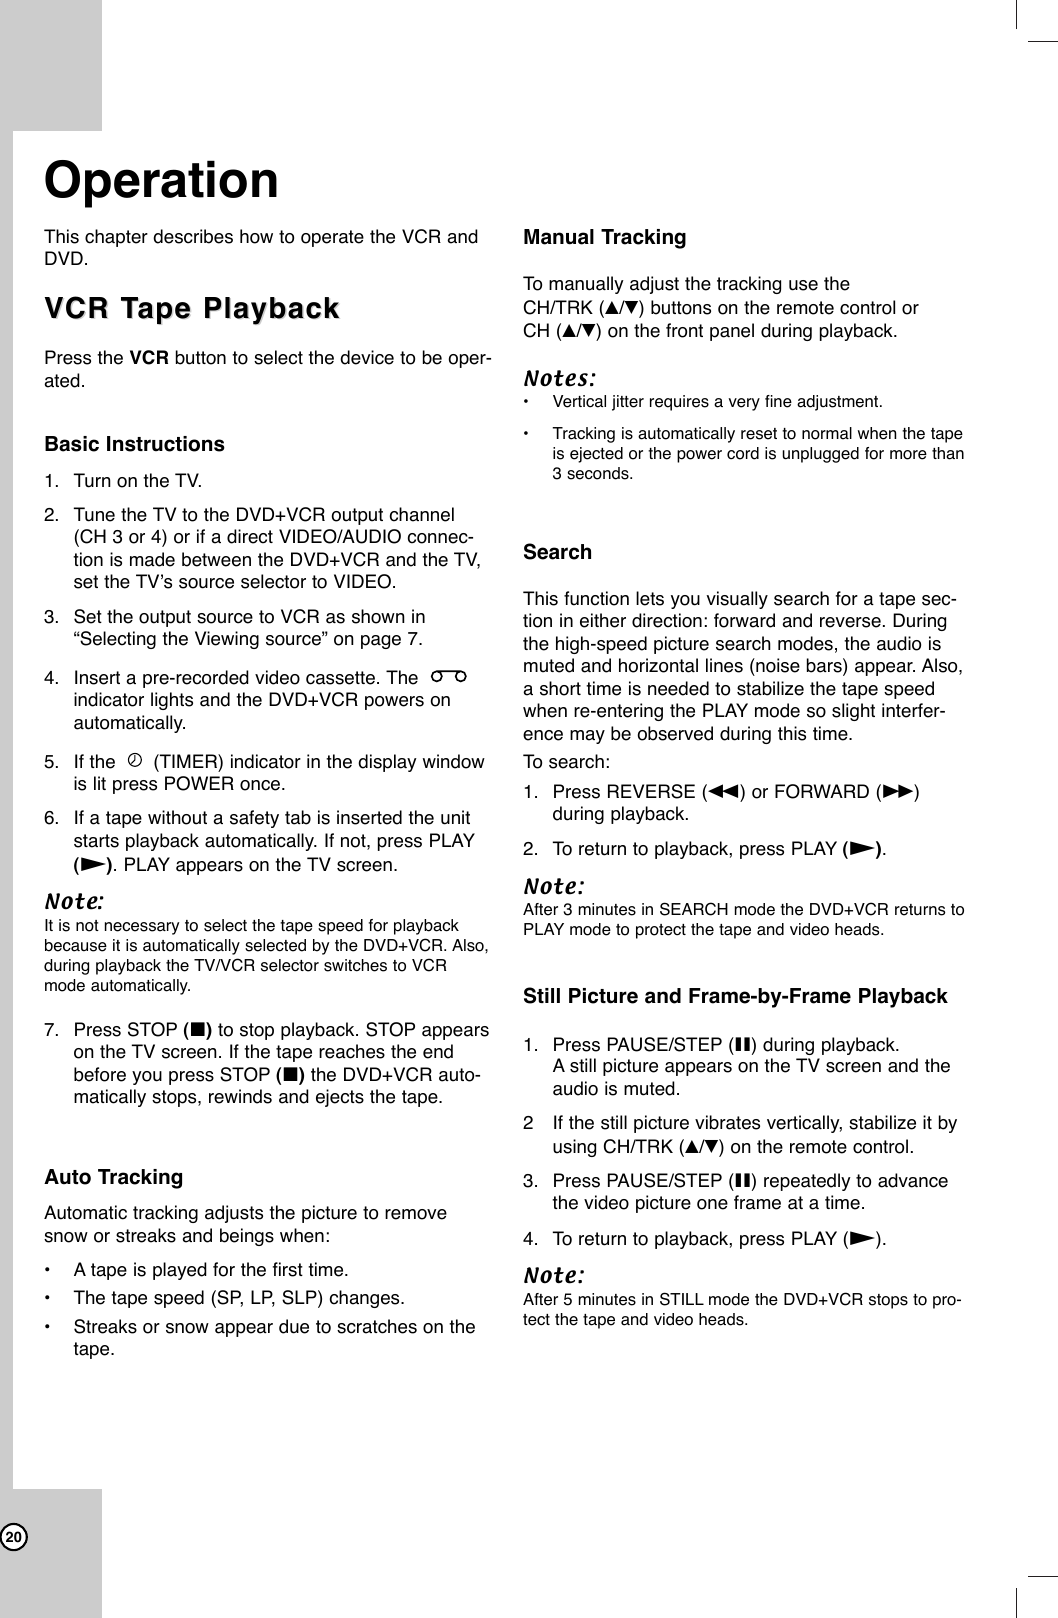 20This chapter describes how to operate the VCR andDVD.VCR TVCR Tape Playbackape PlaybackPress the VCR button to select the device to be oper-ated. Basic Instructions1. Turn on the TV.2. Tune the TV to the DVD+VCR output channel(CH 3 or 4) or if a direct VIDEO/AUDIO connec-tion is made between the DVD+VCR and the TV,set the TV’s source selector to VIDEO.3. Set the output source to VCR as shown in“Selecting the Viewing source” on page 7.4. Insert a pre-recorded video cassette. The indicator lights and the DVD+VCR powers onautomatically. 5. If the  (TIMER) indicator in the display windowis lit press POWER once.6. If a tape without a safety tab is inserted the unitstarts playback automatically. If not, press PLAY(N). PLAY appears on the TV screen. Note: It is not necessary to select the tape speed for playbackbecause it is automatically selected by the DVD+VCR. Also,during playback the TV/VCR selector switches to VCRmode automatically.7. Press STOP (x)to stop playback. STOP appearson the TV screen. If the tape reaches the endbefore you press STOP (x) the DVD+VCR auto-matically stops, rewinds and ejects the tape.Auto TrackingAutomatic tracking adjusts the picture to removesnow or streaks and beings when:•Atape is played for the first time.•The tape speed (SP, LP, SLP) changes.•Streaks or snow appear due to scratches on thetape.Manual TrackingTo  manually adjust the tracking use theCH/TRK (v/V) buttons on the remote control or CH (v/V) on the front panel during playback. Notes:•Vertical jitter requires a very fine adjustment.•Tracking is automatically reset to normal when the tapeis ejected or the power cord is unplugged for more than3 seconds.SearchThis function lets you visually search for a tape sec-tion in either direction: forward and reverse. Duringthe high-speed picture search modes, the audio ismuted and horizontal lines (noise bars) appear. Also,a short time is needed to stabilize the tape speedwhen re-entering the PLAY mode so slight interfer-ence may be observed during this time.To  search:1. Press REVERSE (m) or FORWARD (M)during playback.2. To return to playback, press PLAY (N).Note: After 3 minutes in SEARCH mode the DVD+VCR returns toPLAY mode to protect the tape and video heads.Still Picture and Frame-by-Frame Playback1. Press PAUSE/STEP (X) during playback.Astill picture appears on the TV screen and theaudio is muted.2If the still picture vibrates vertically, stabilize it byusing CH/TRK (v/V)on the remote control.3. Press PAUSE/STEP (X) repeatedly to advancethe video picture one frame at a time.4. To return to playback, press PLAY (N).Note: After 5 minutes in STILL mode the DVD+VCR stops to pro-tect the tape and video heads.Operation